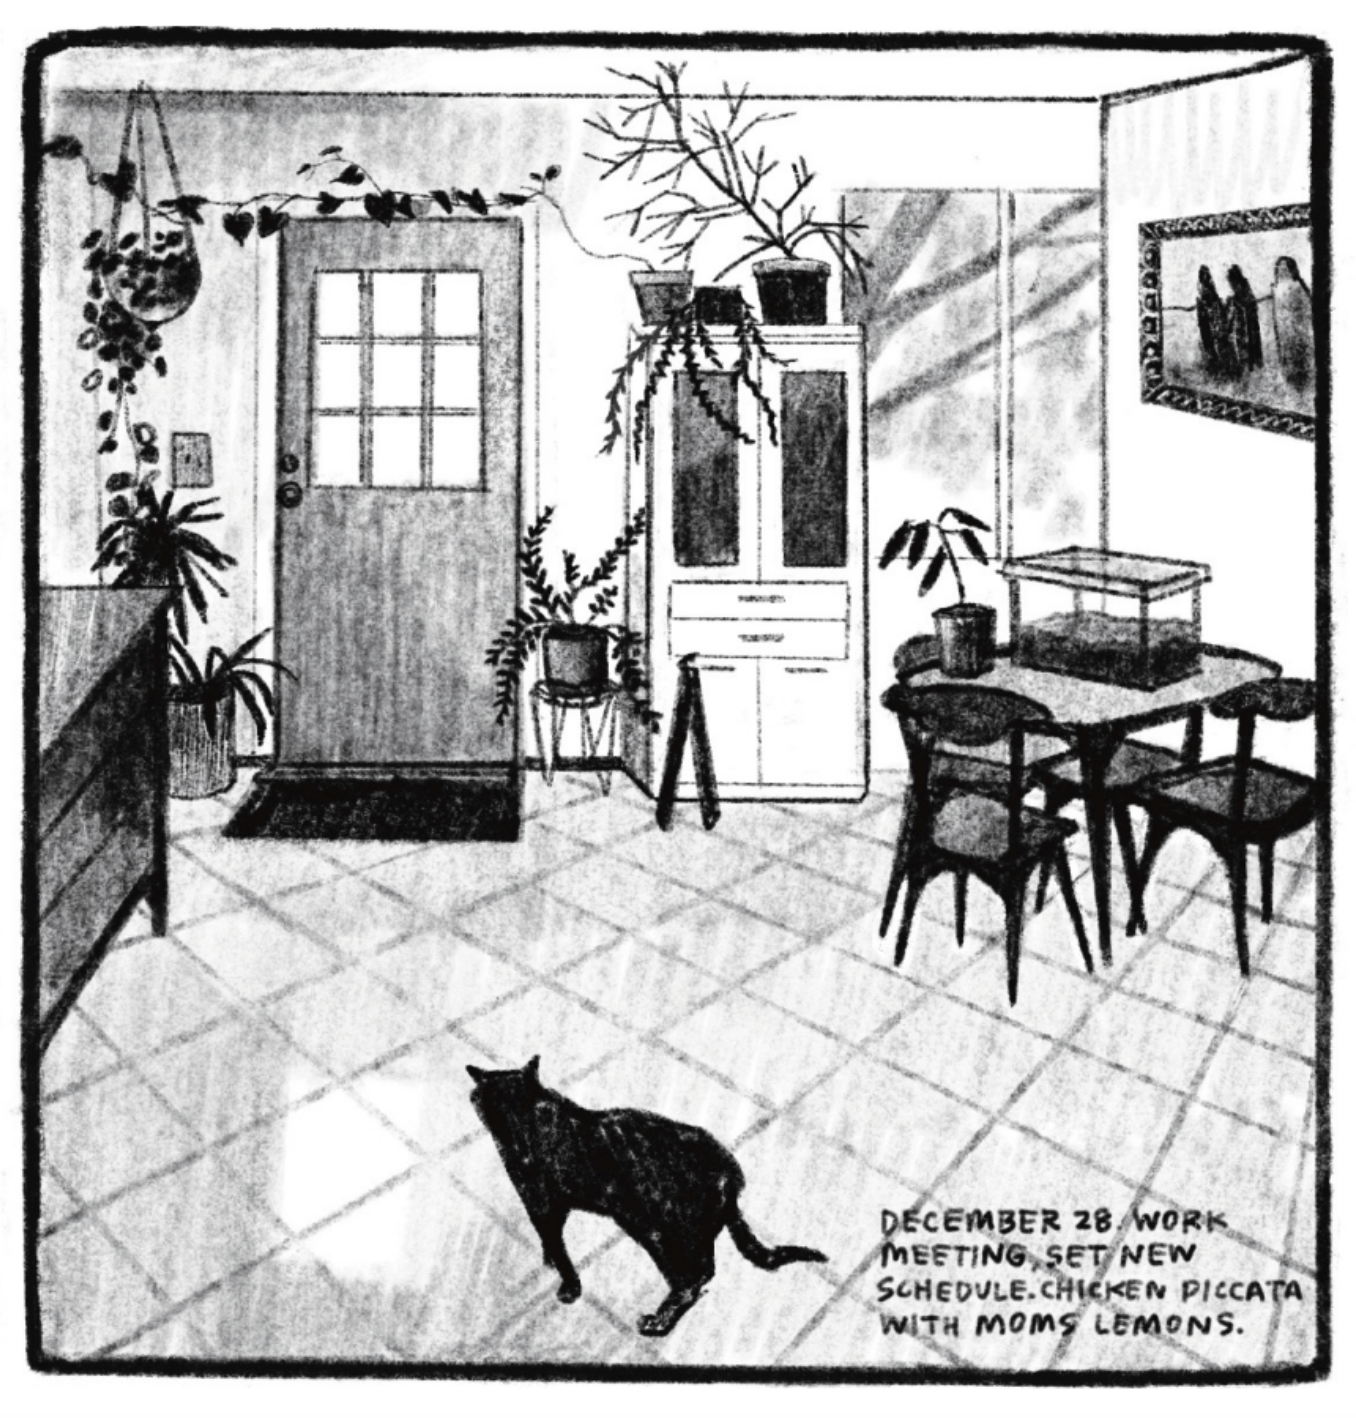 A shot of Kimâ€™s house, front door framed by house plants, kitchen table topped with a dirt-filled rectangular terrarium. In the foreground is the silhouette of a cat standing on the tiled floor. â€œDecember 28. Work meeting, new schedule. Chicken piccata with momâ€™s lemons.â€